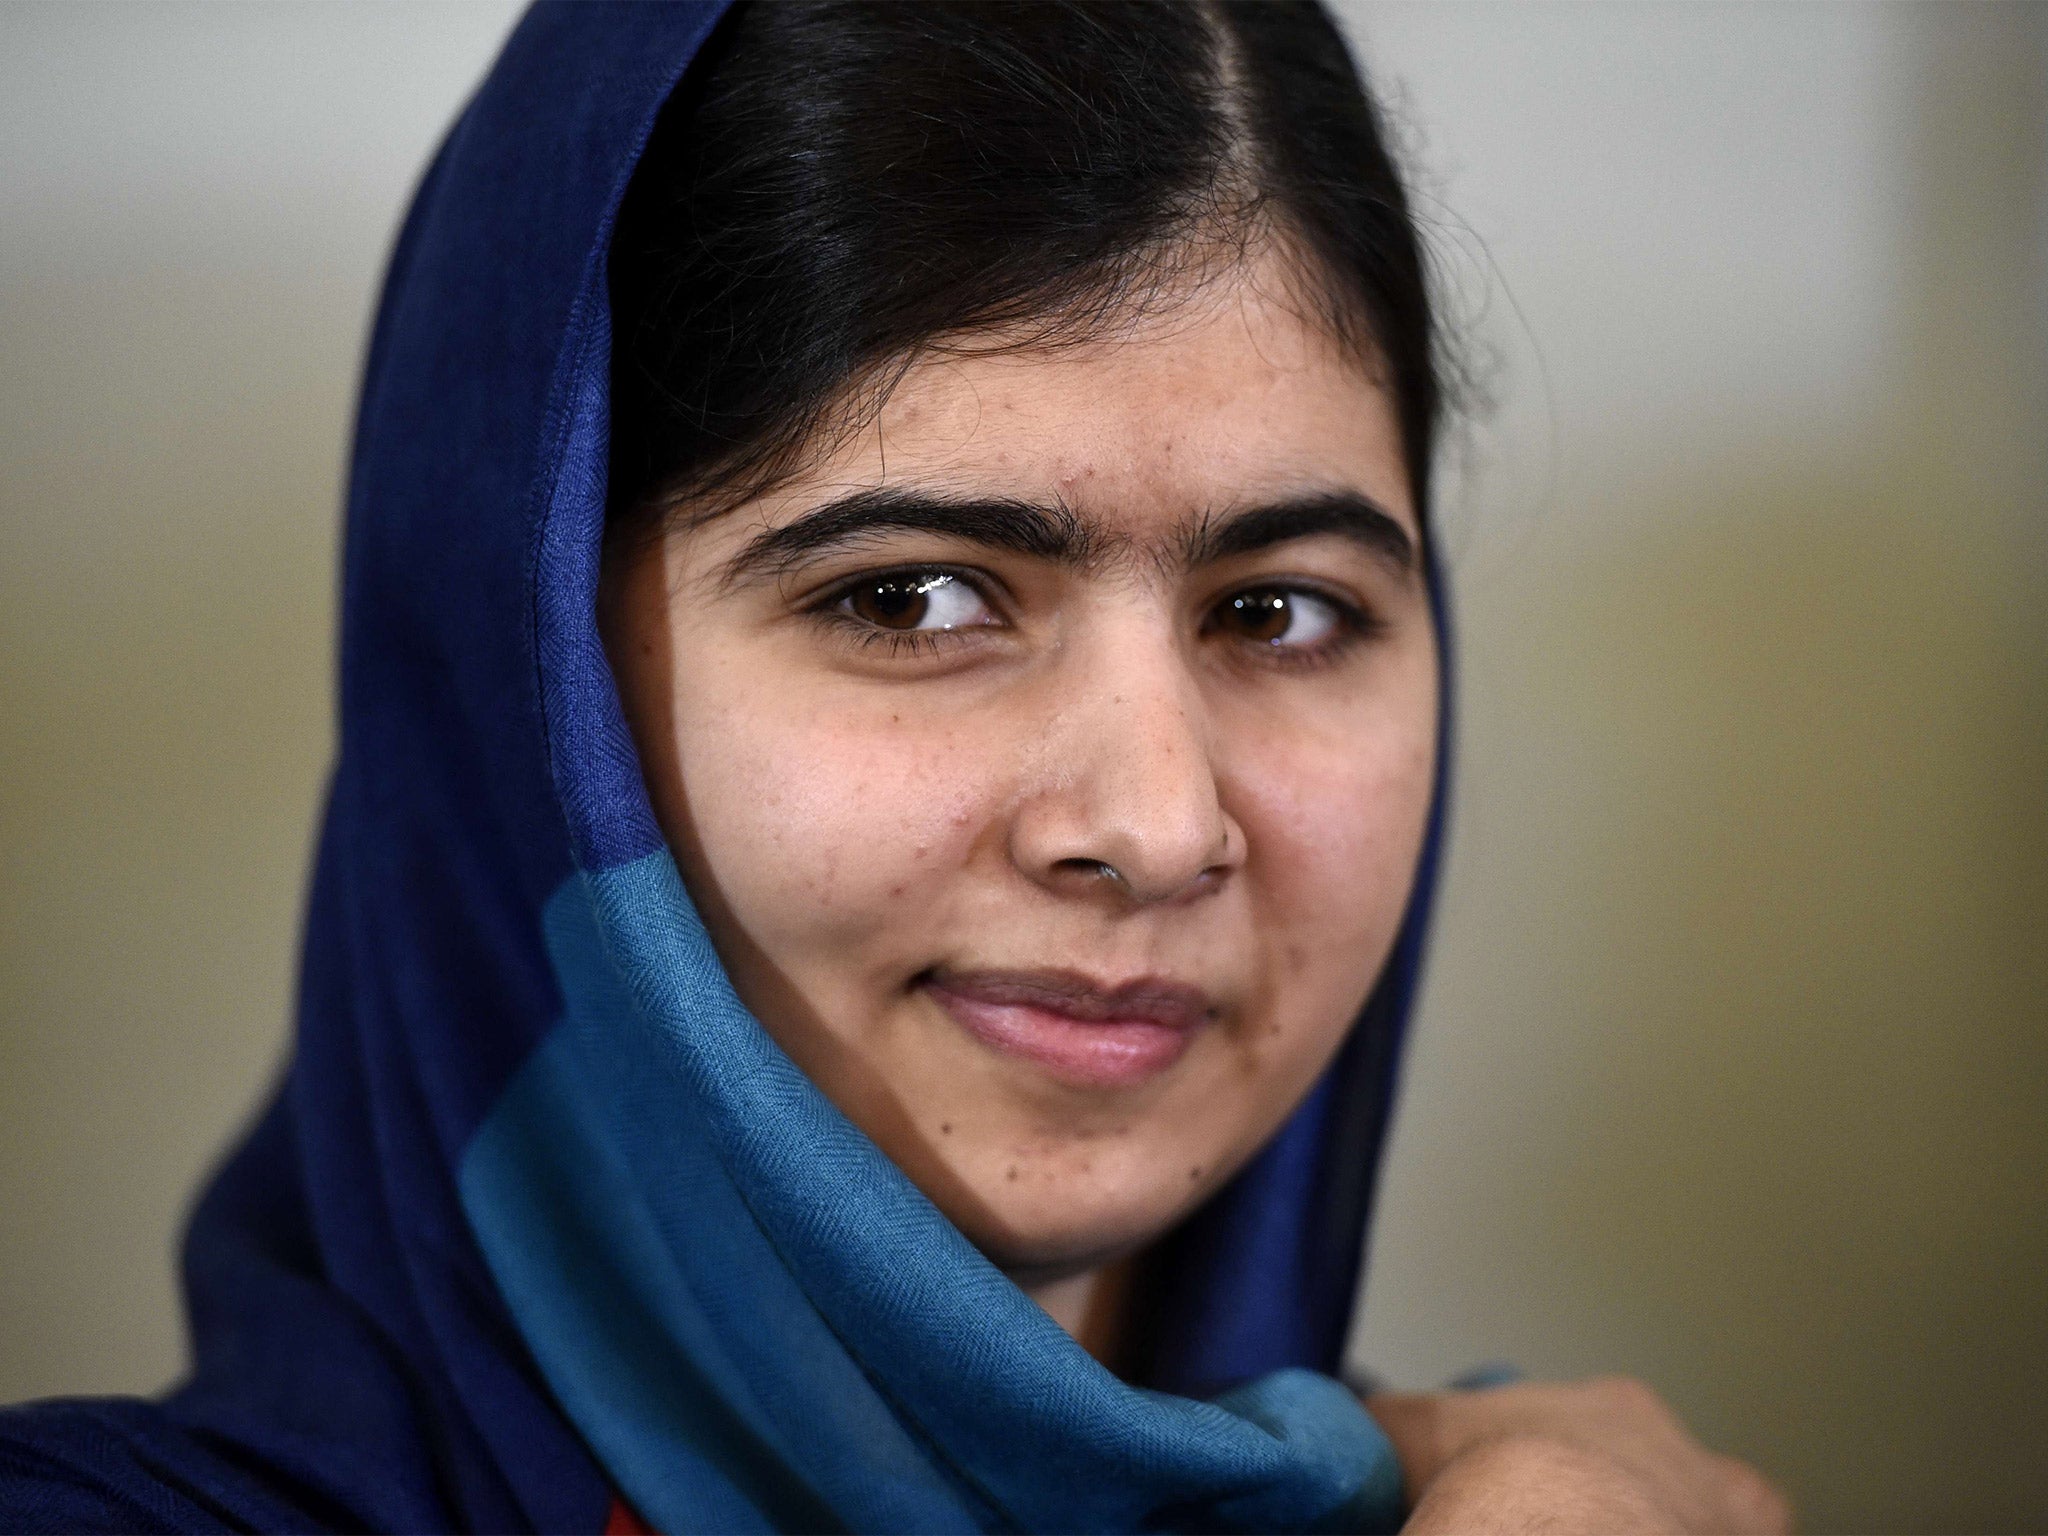 Malala Yousafzai : 'I condemn these atrocious and cowardly acts' (Getty)